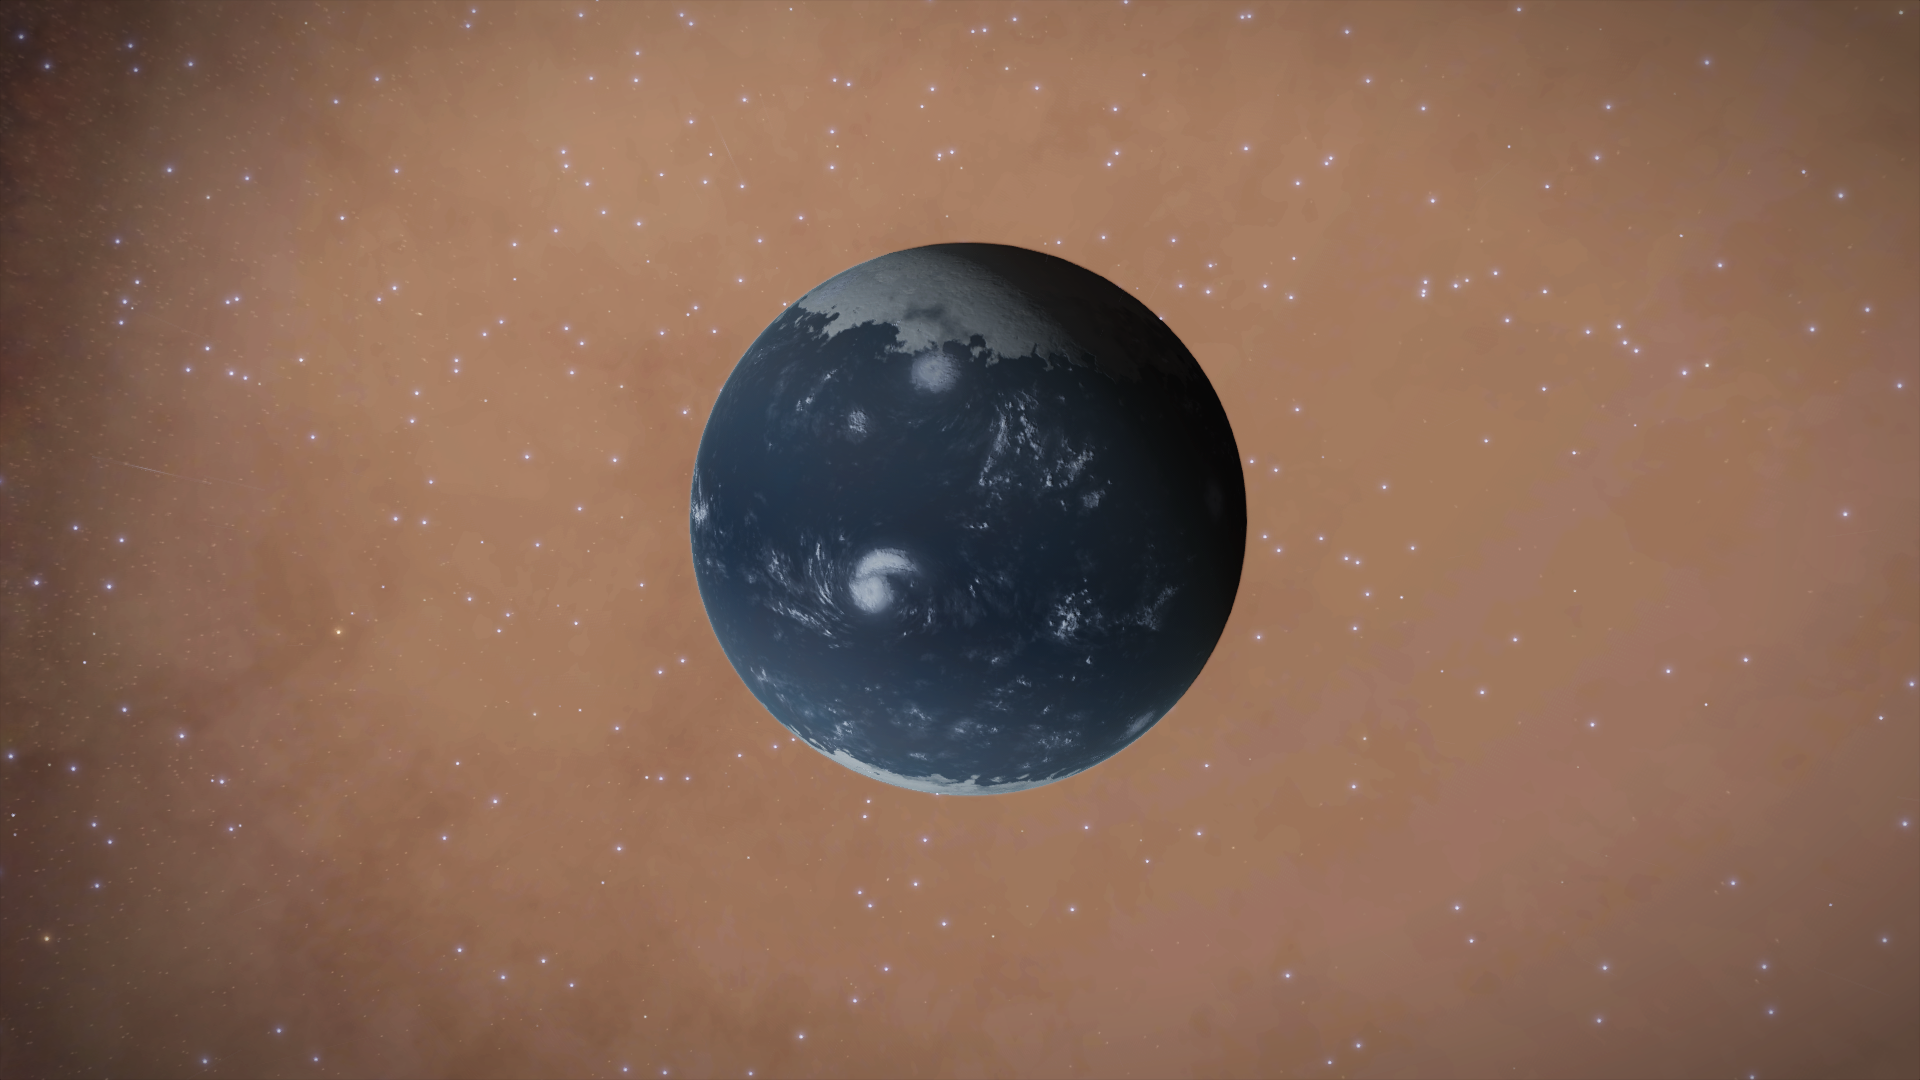 The Water World of the system